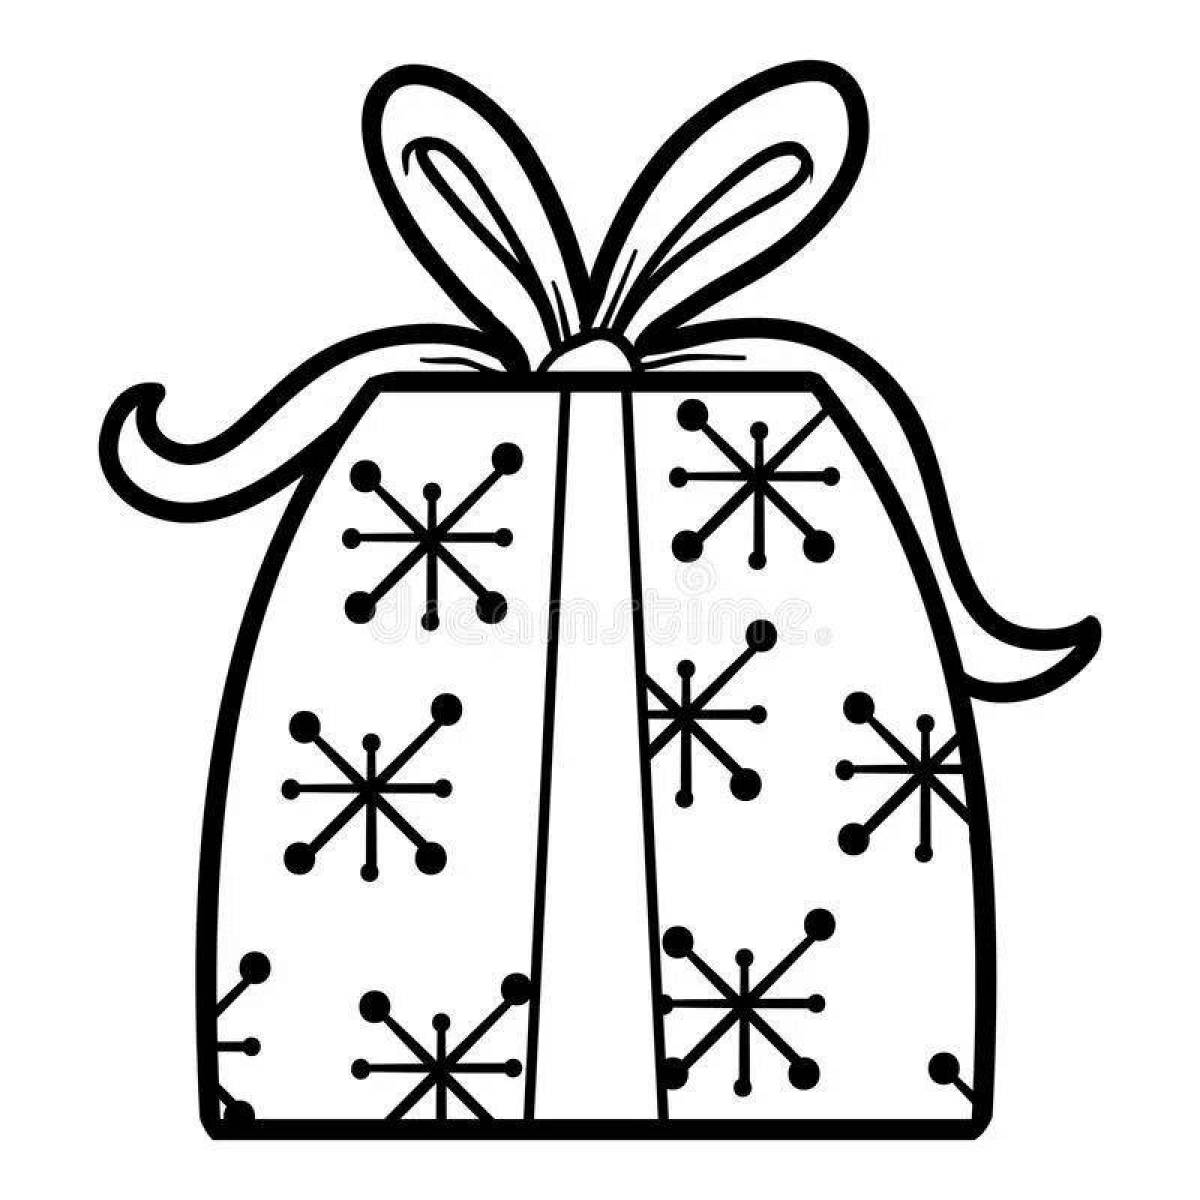 Coloring page delightful gift bag